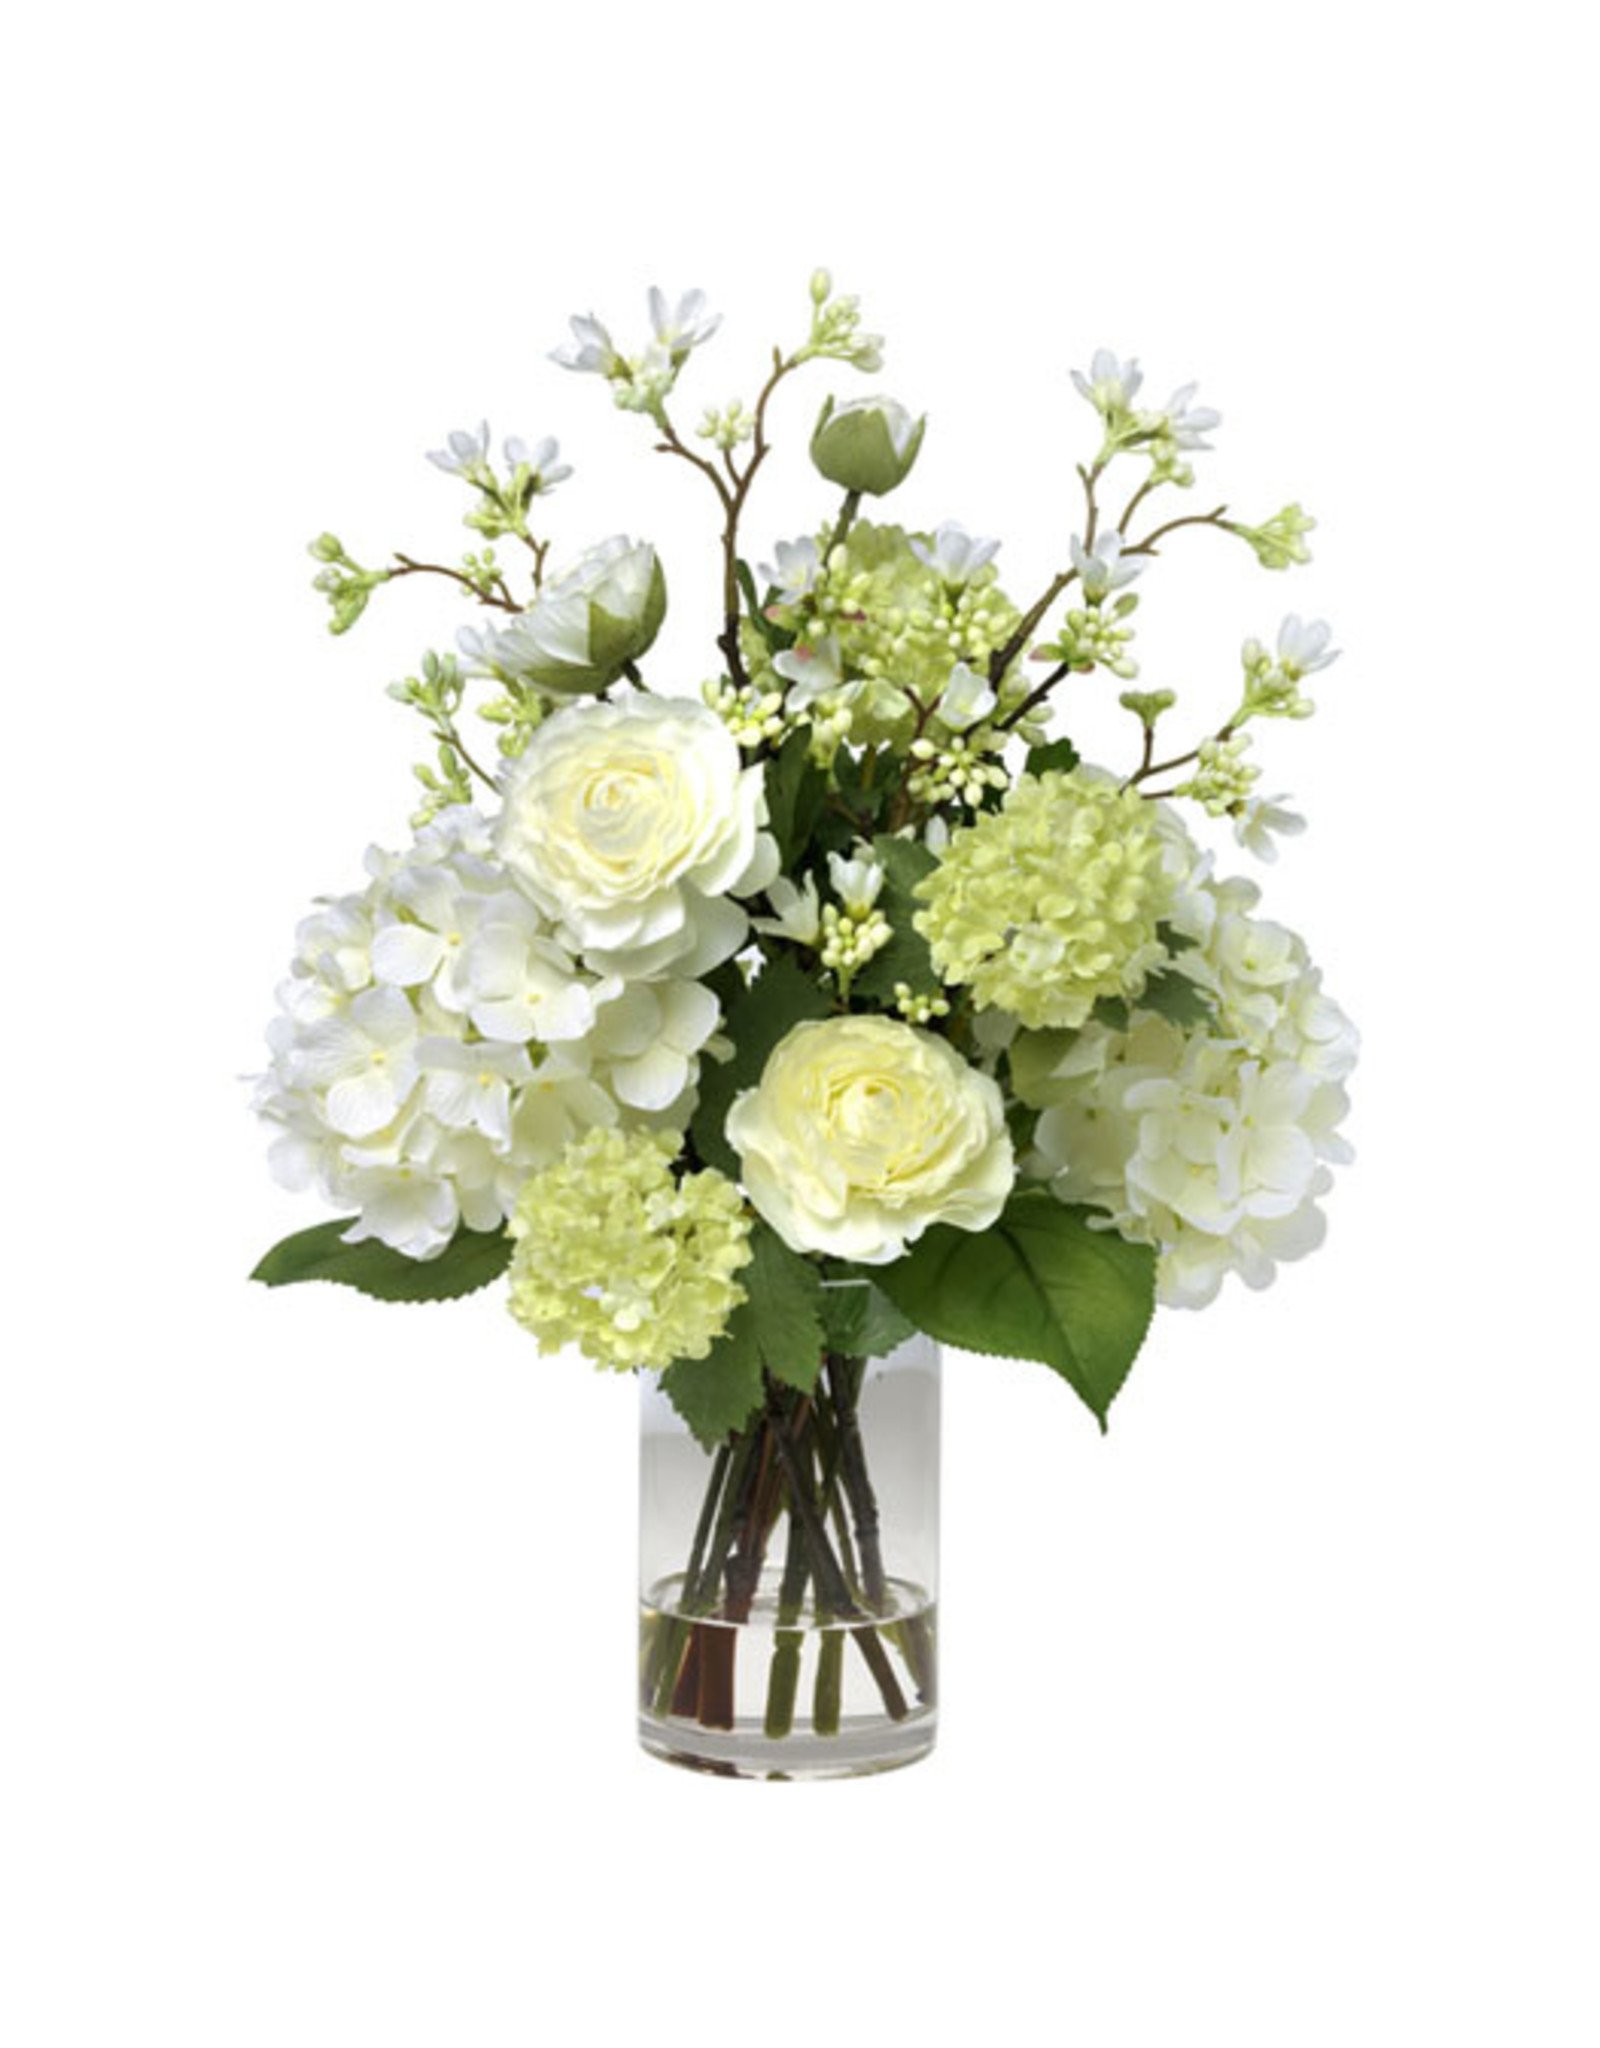 Floral Blooms Ranunculus, Hydrangea & Blossom Bouquet In Glass Vase